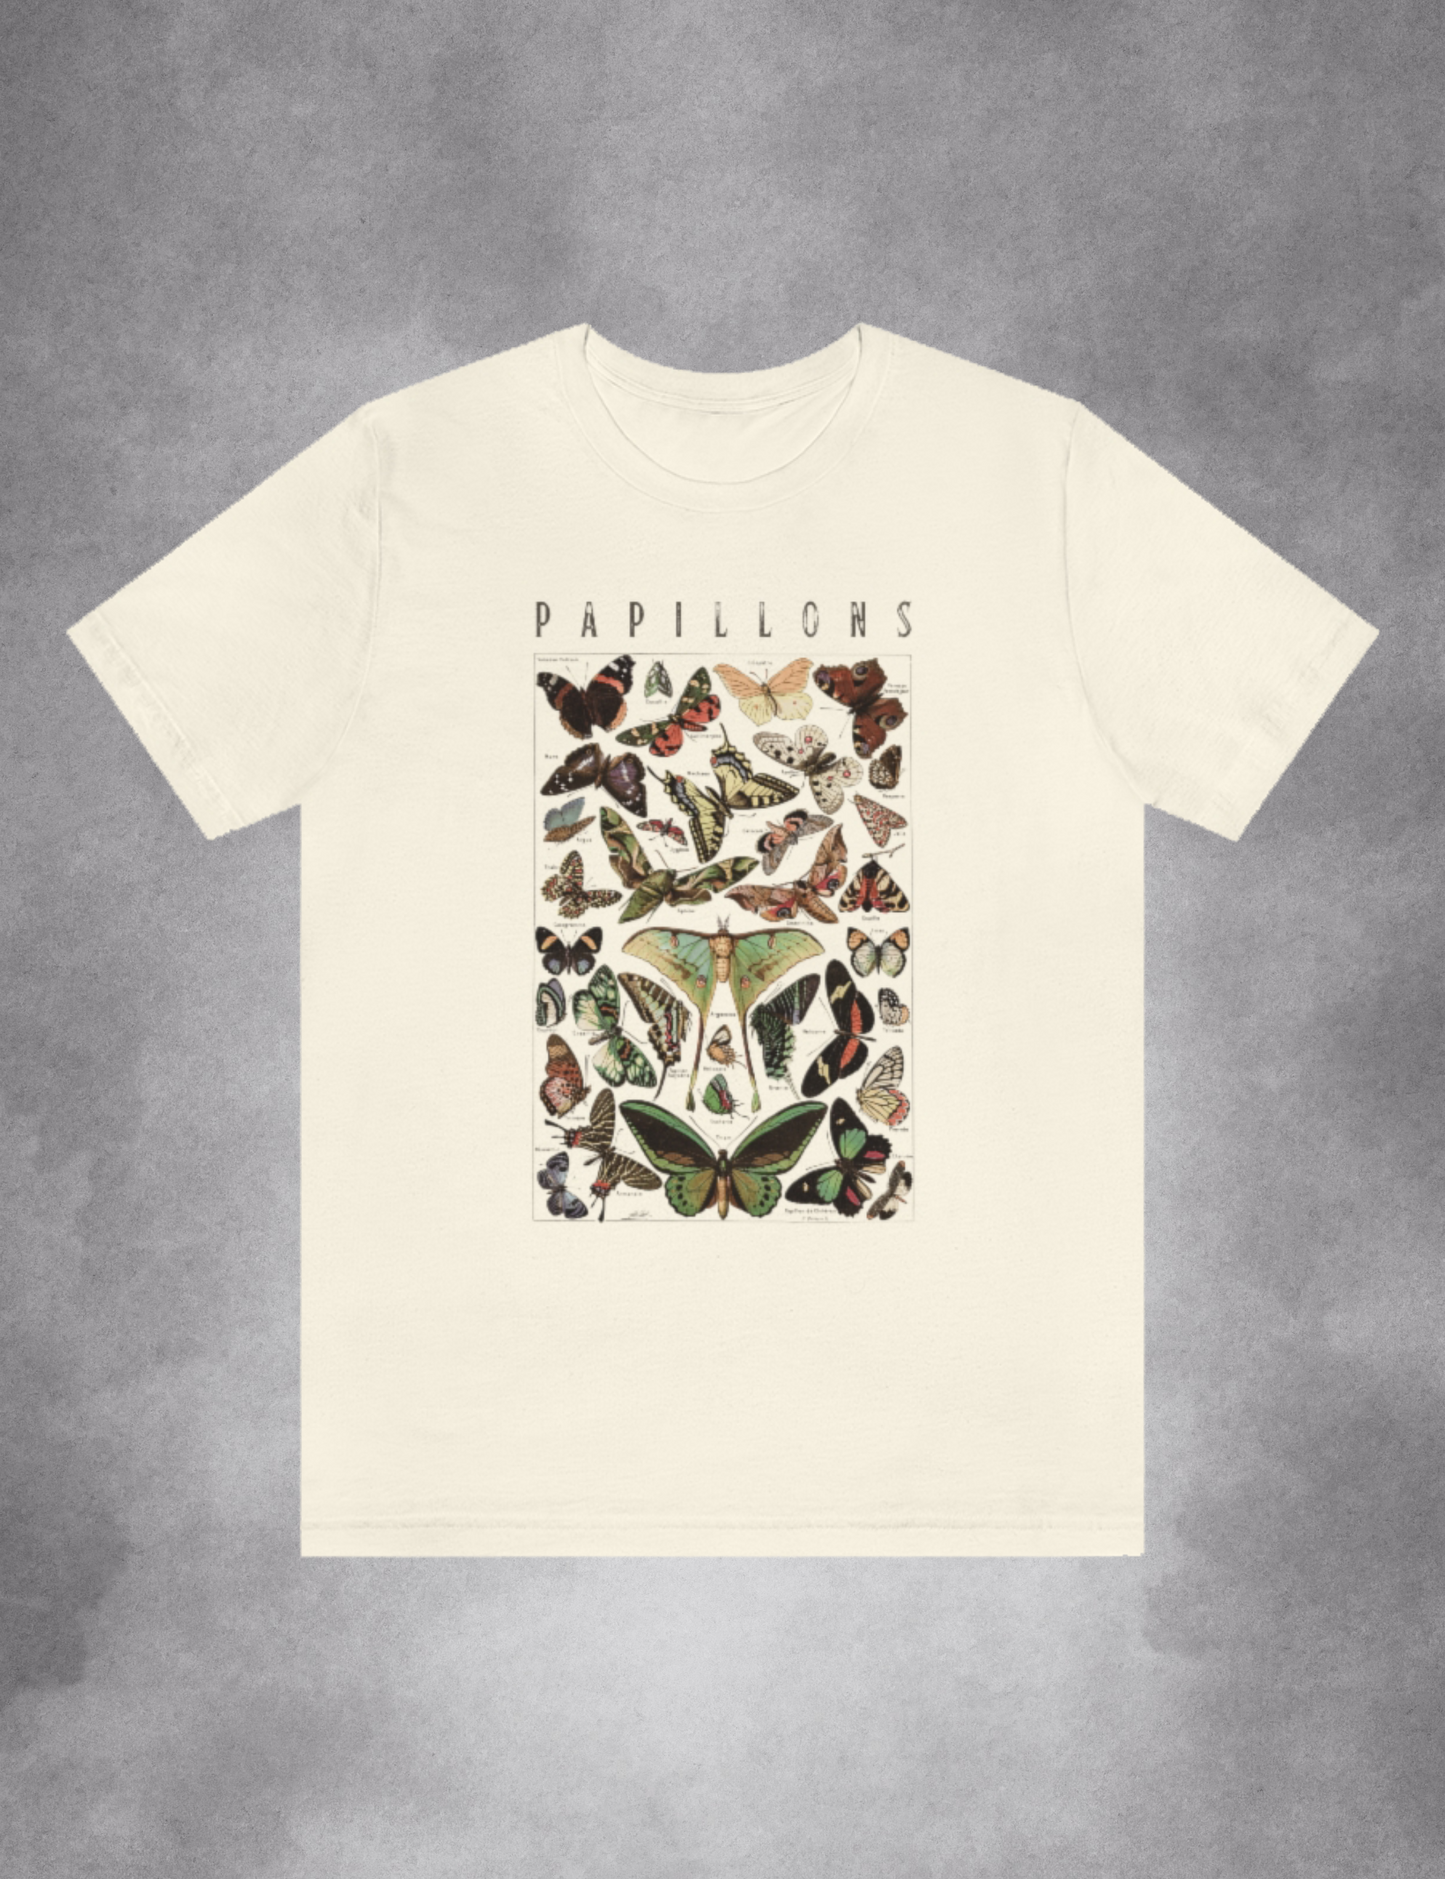 Grunge Fairycore Aesthetic Outfits Butterfly Shirt